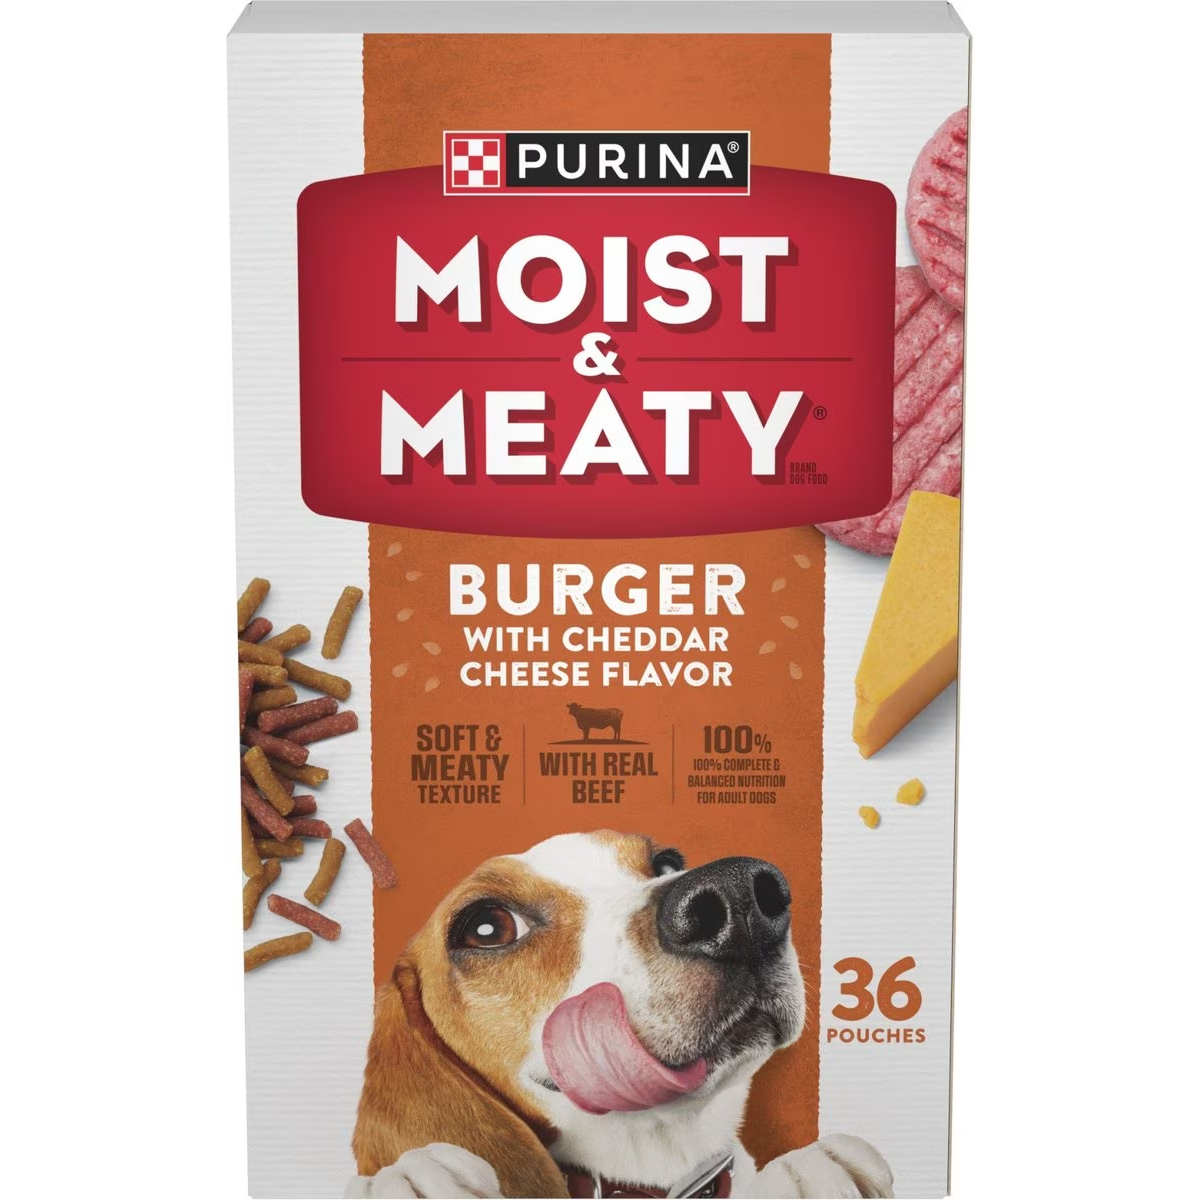 New Project Moist & Meaty Burger with Cheddar Cheese Flavor Dry Dog Food 